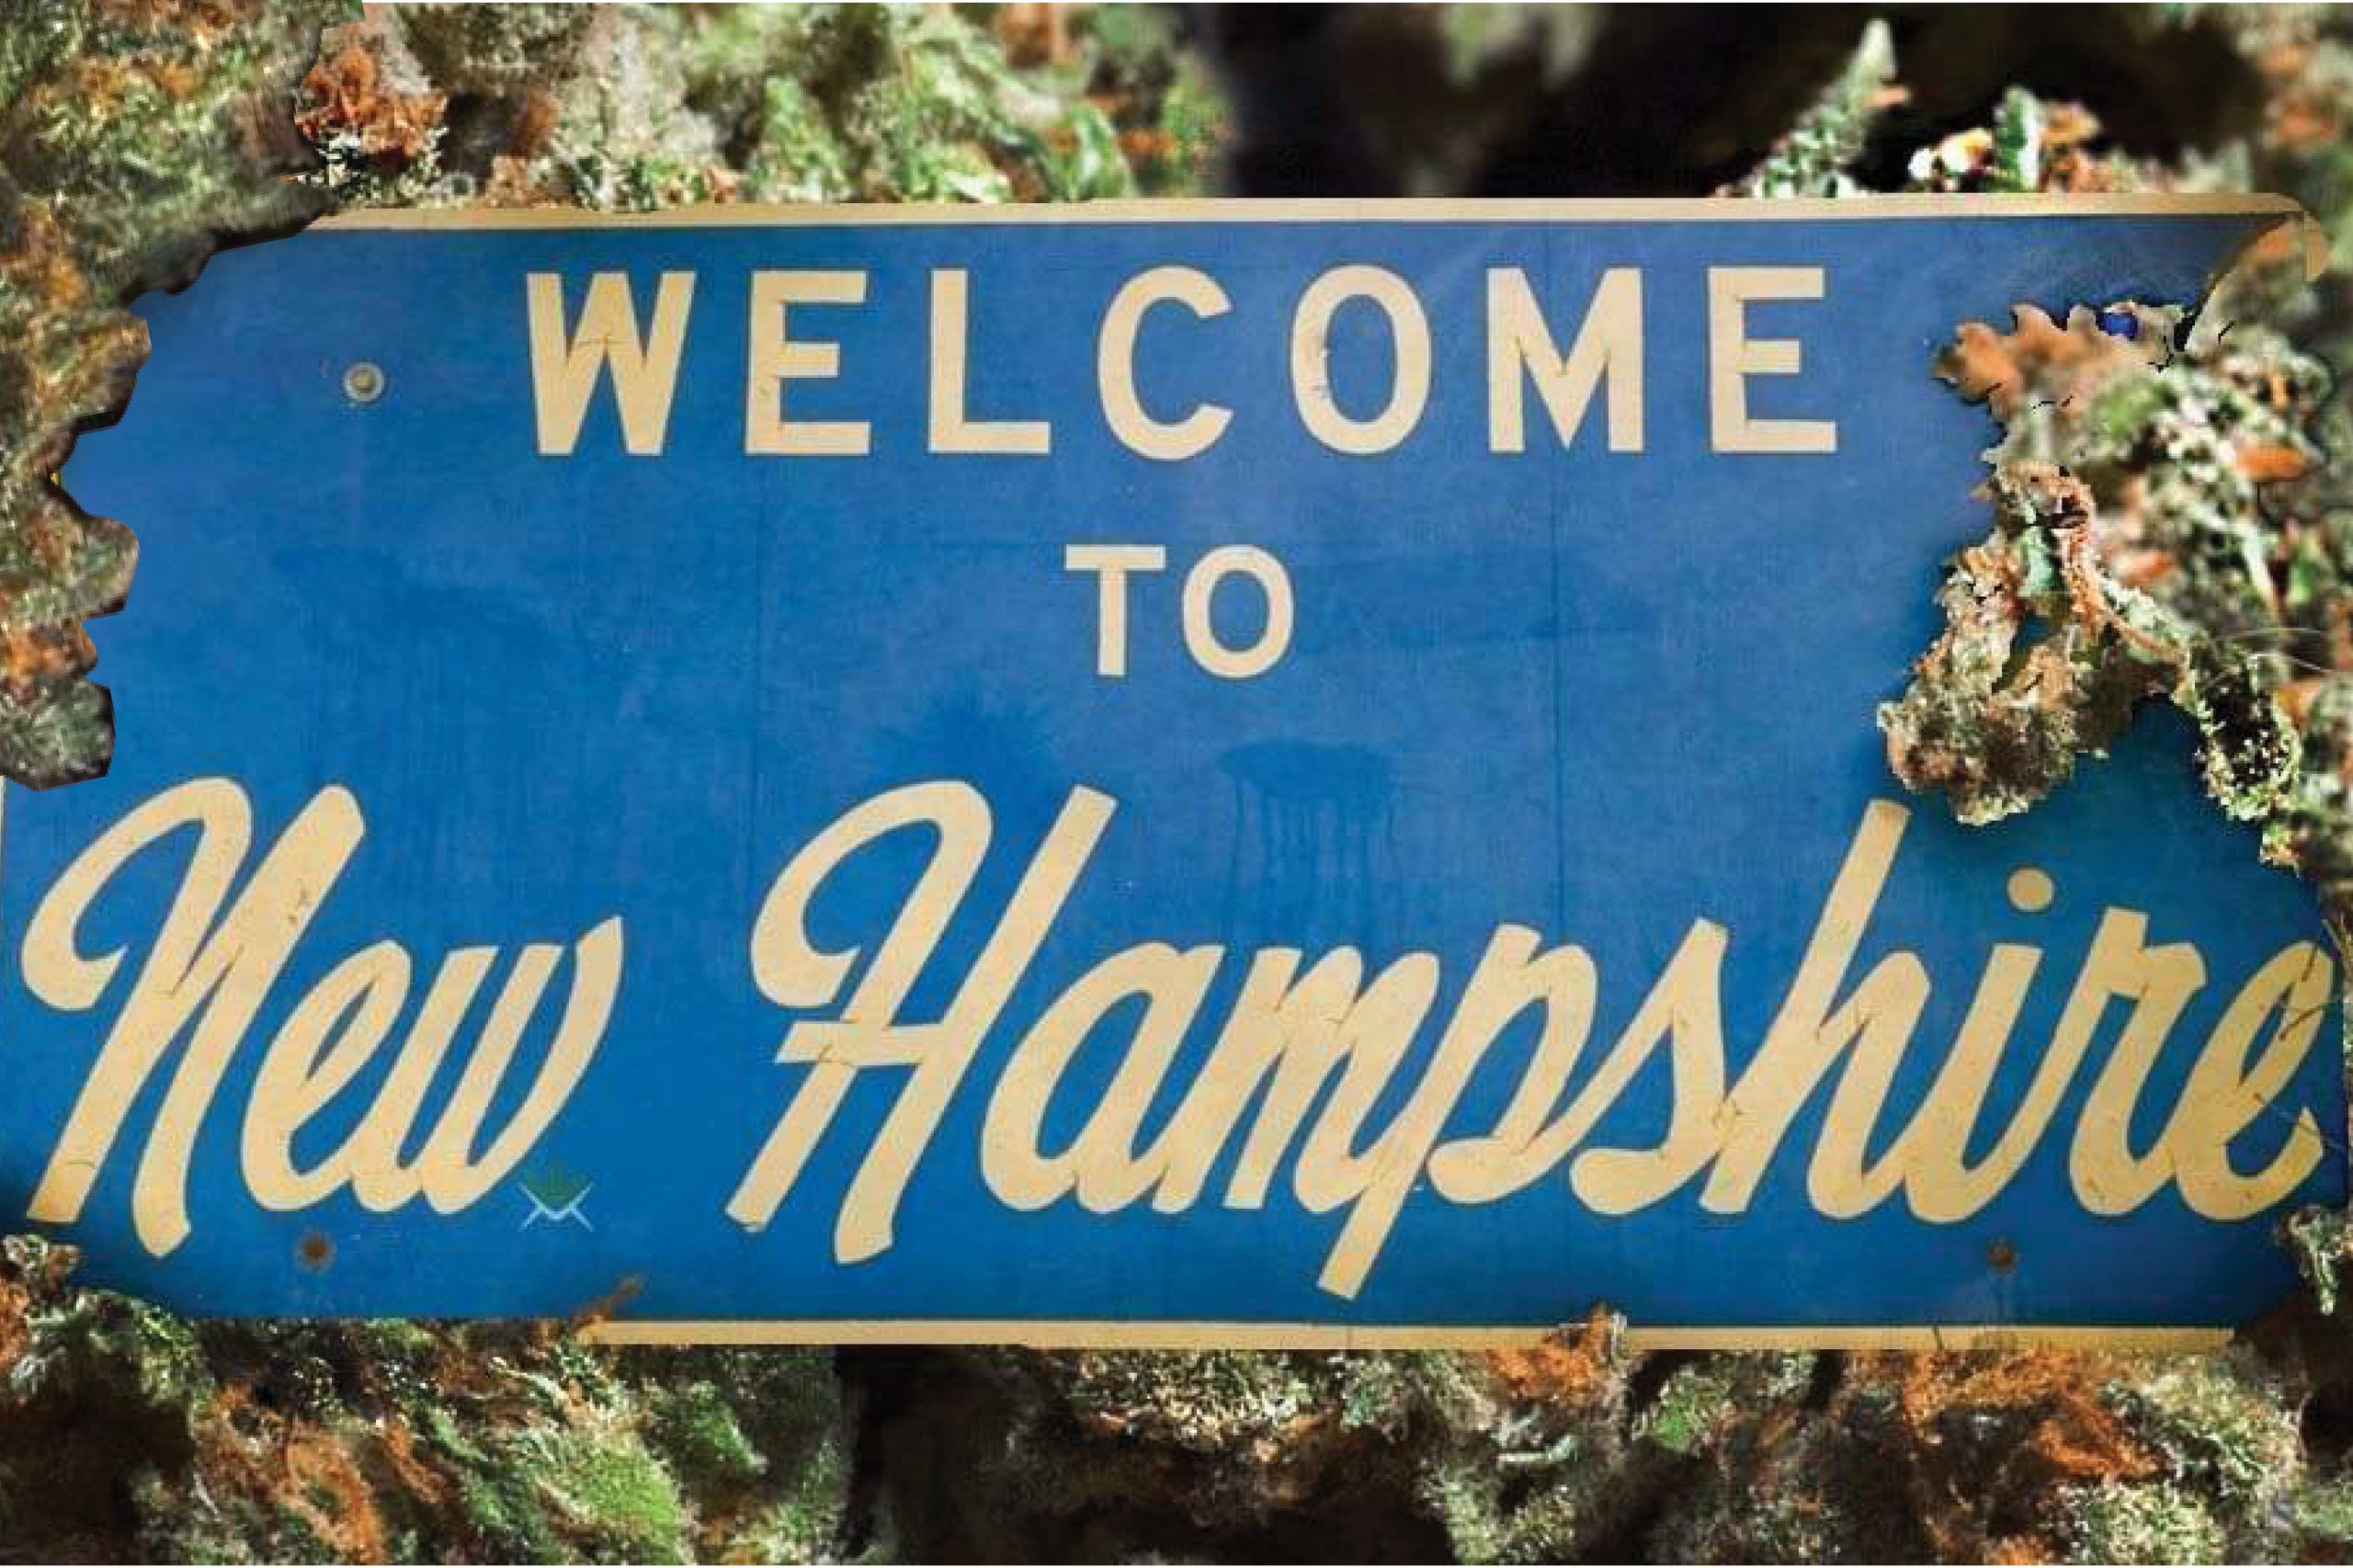 New Hampshire Medical Cannabis Dispensaries Will Soon Serve Out-of-State Patients